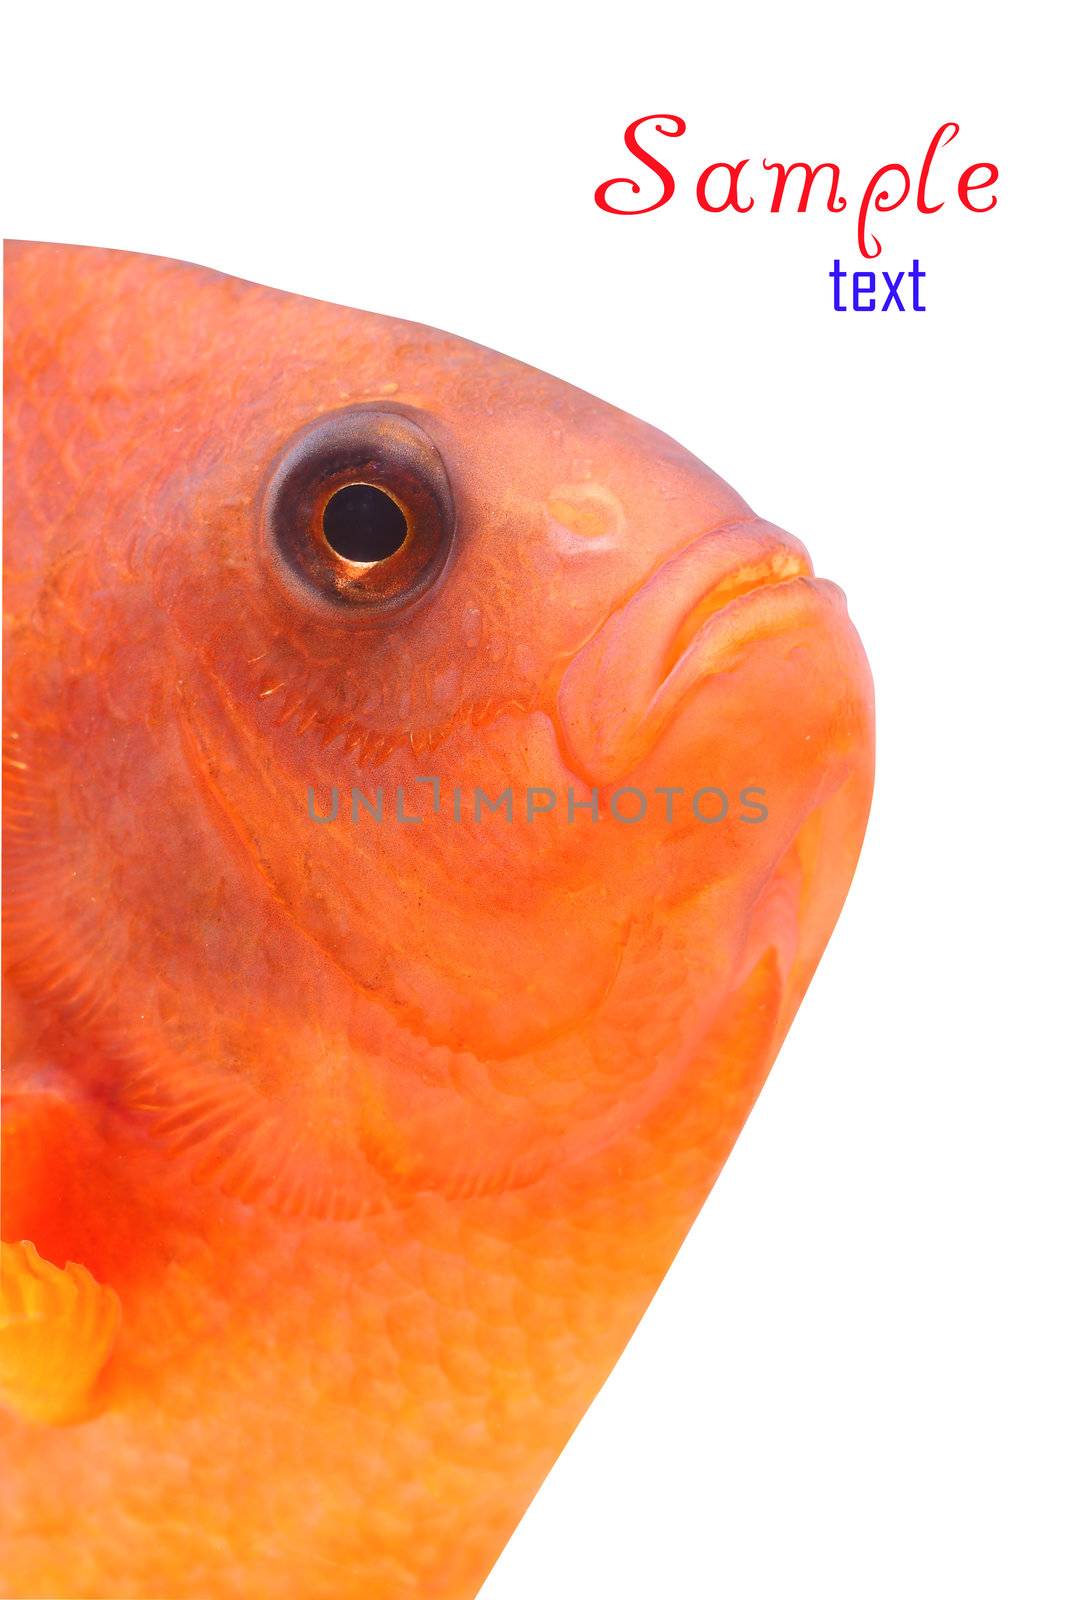 clownfish and copy space for sample text here